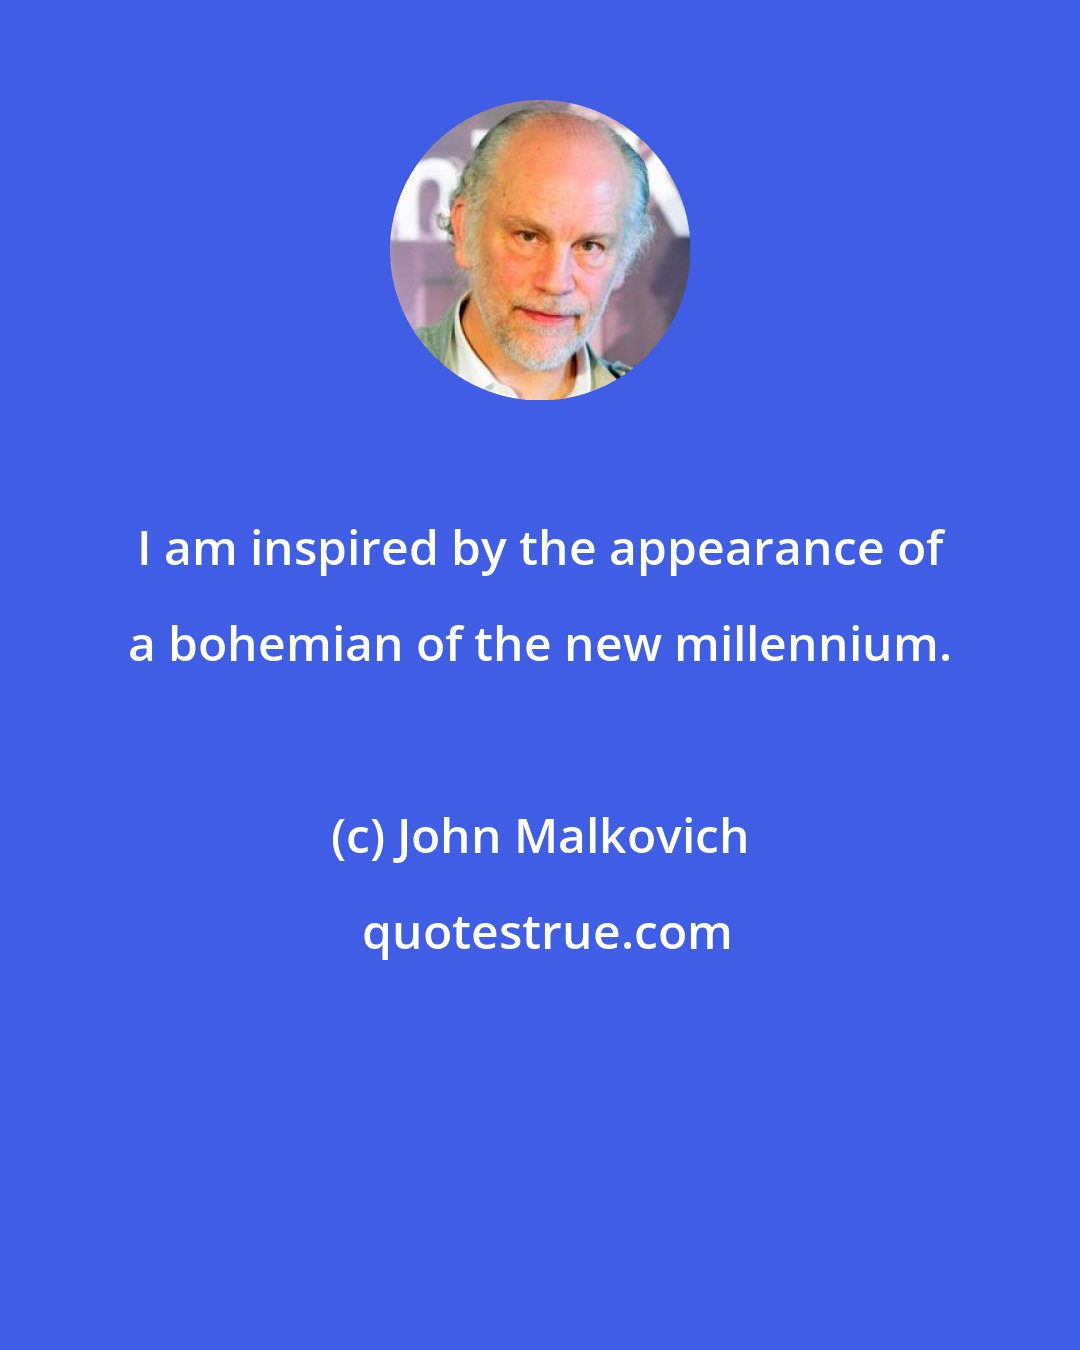 John Malkovich: I am inspired by the appearance of a bohemian of the new millennium.